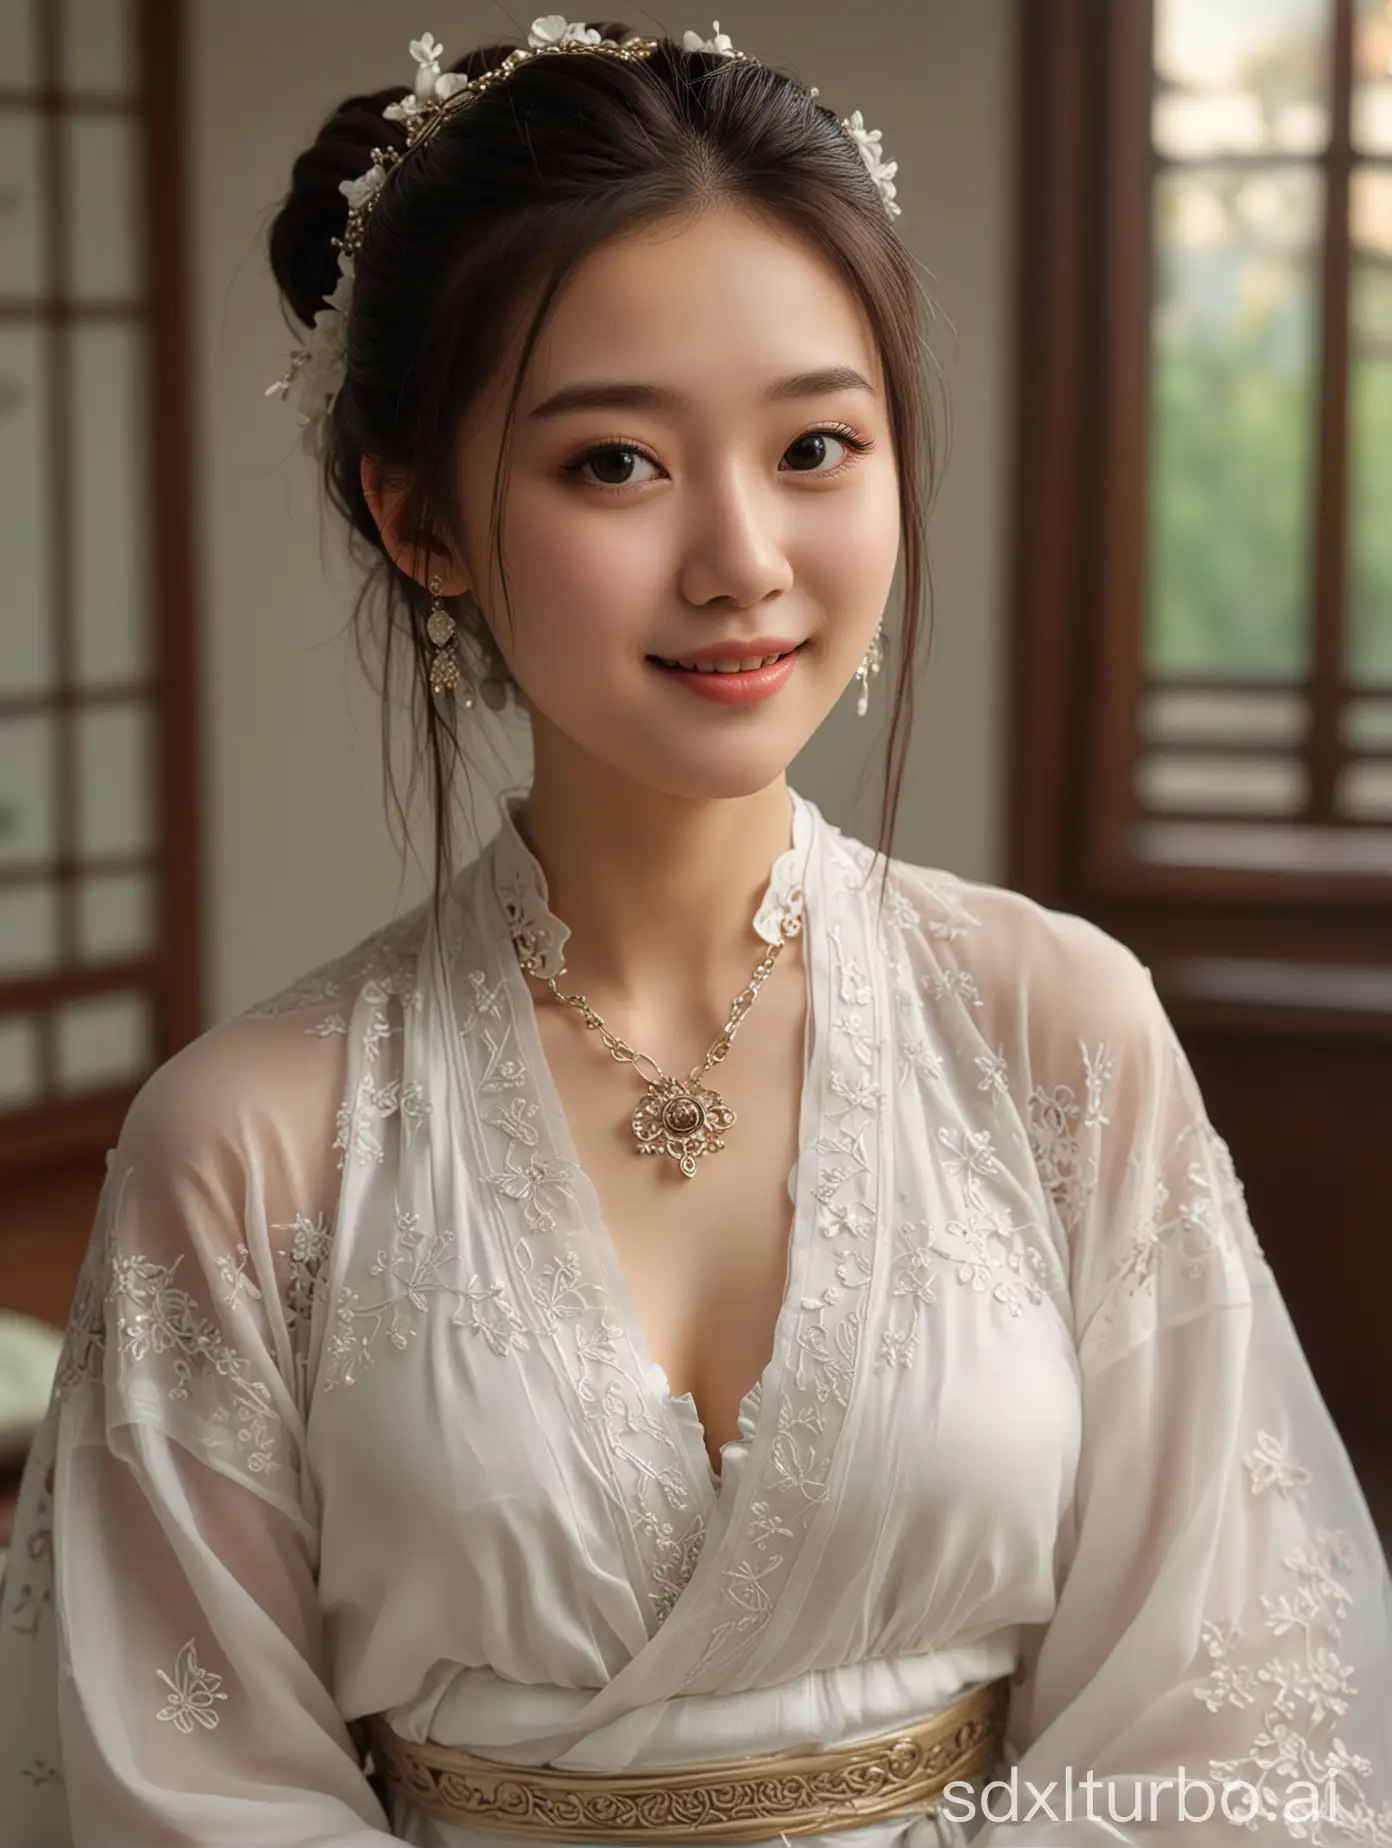 Girl-in-Hanfu-and-White-Bikini-Wearing-a-Necklace-by-the-Pool